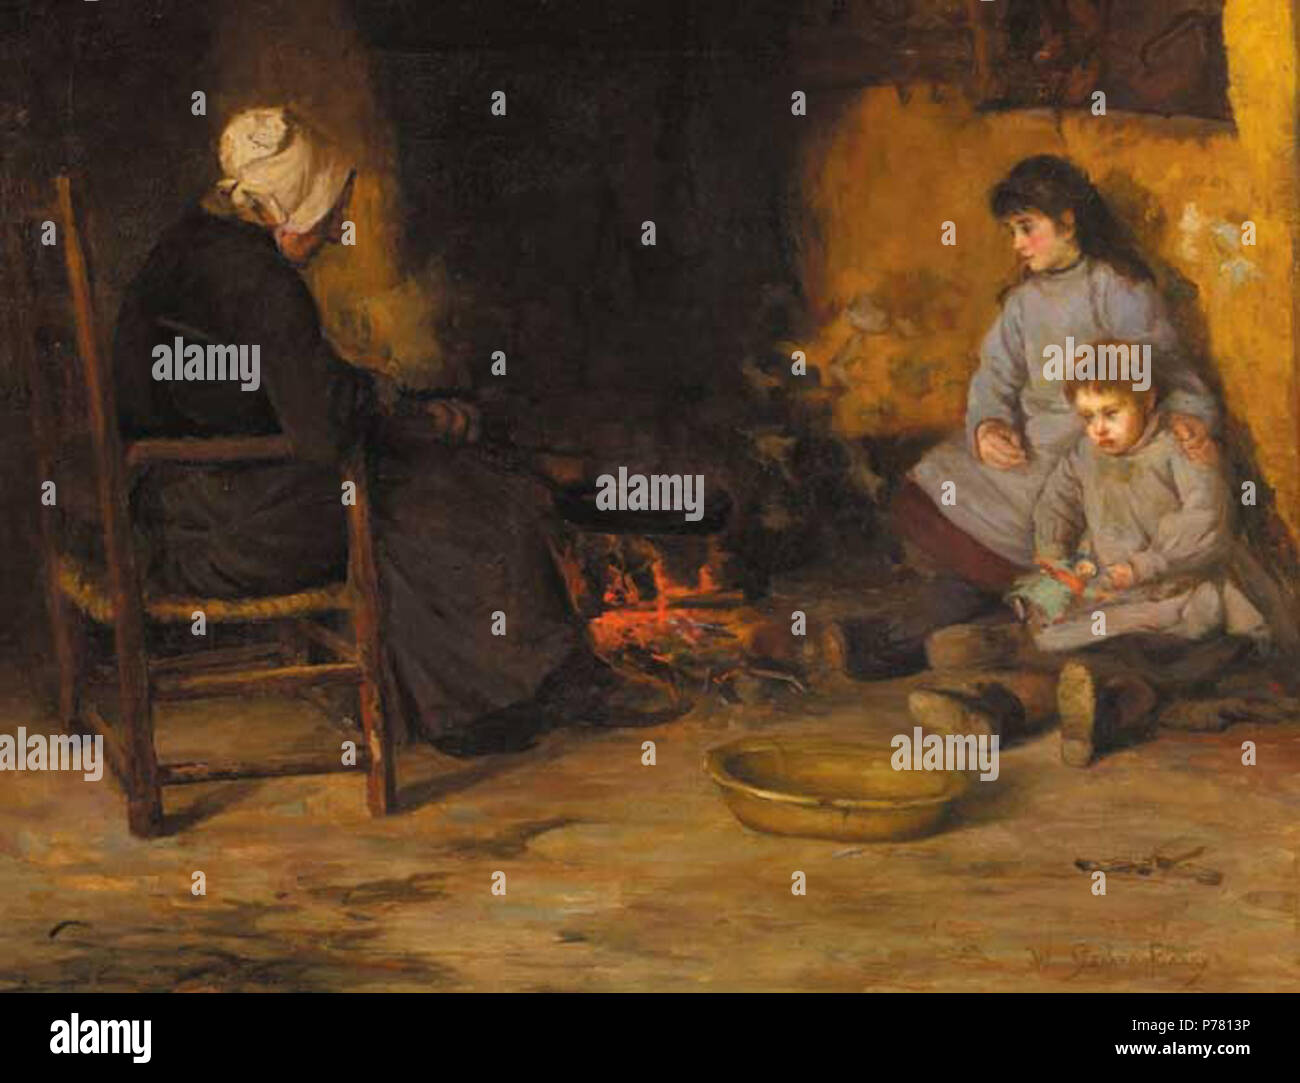 English: William Gerard Barry, 'An old woman and children in a cottage interior', 1887 . 4 October 2011 4 Barry-interior Stock Photo